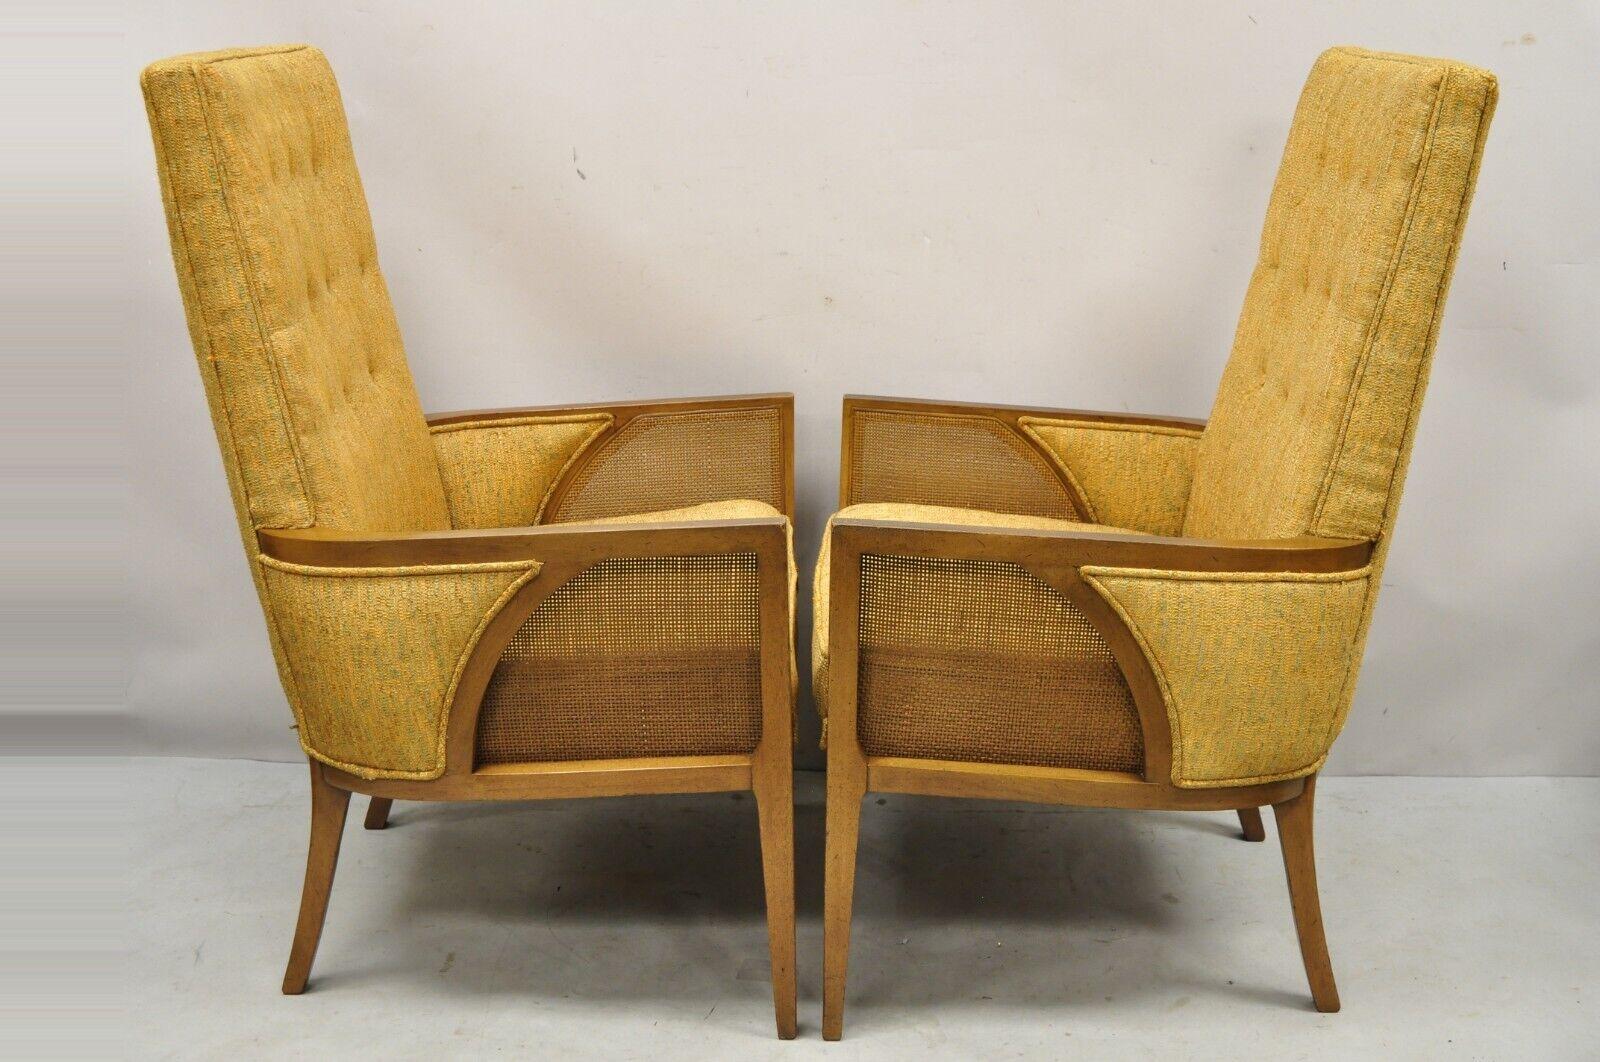 Mid Century Hollywood Regency Sculpted Wood Cane Panel Lounge Chairs - a Pair For Sale 7